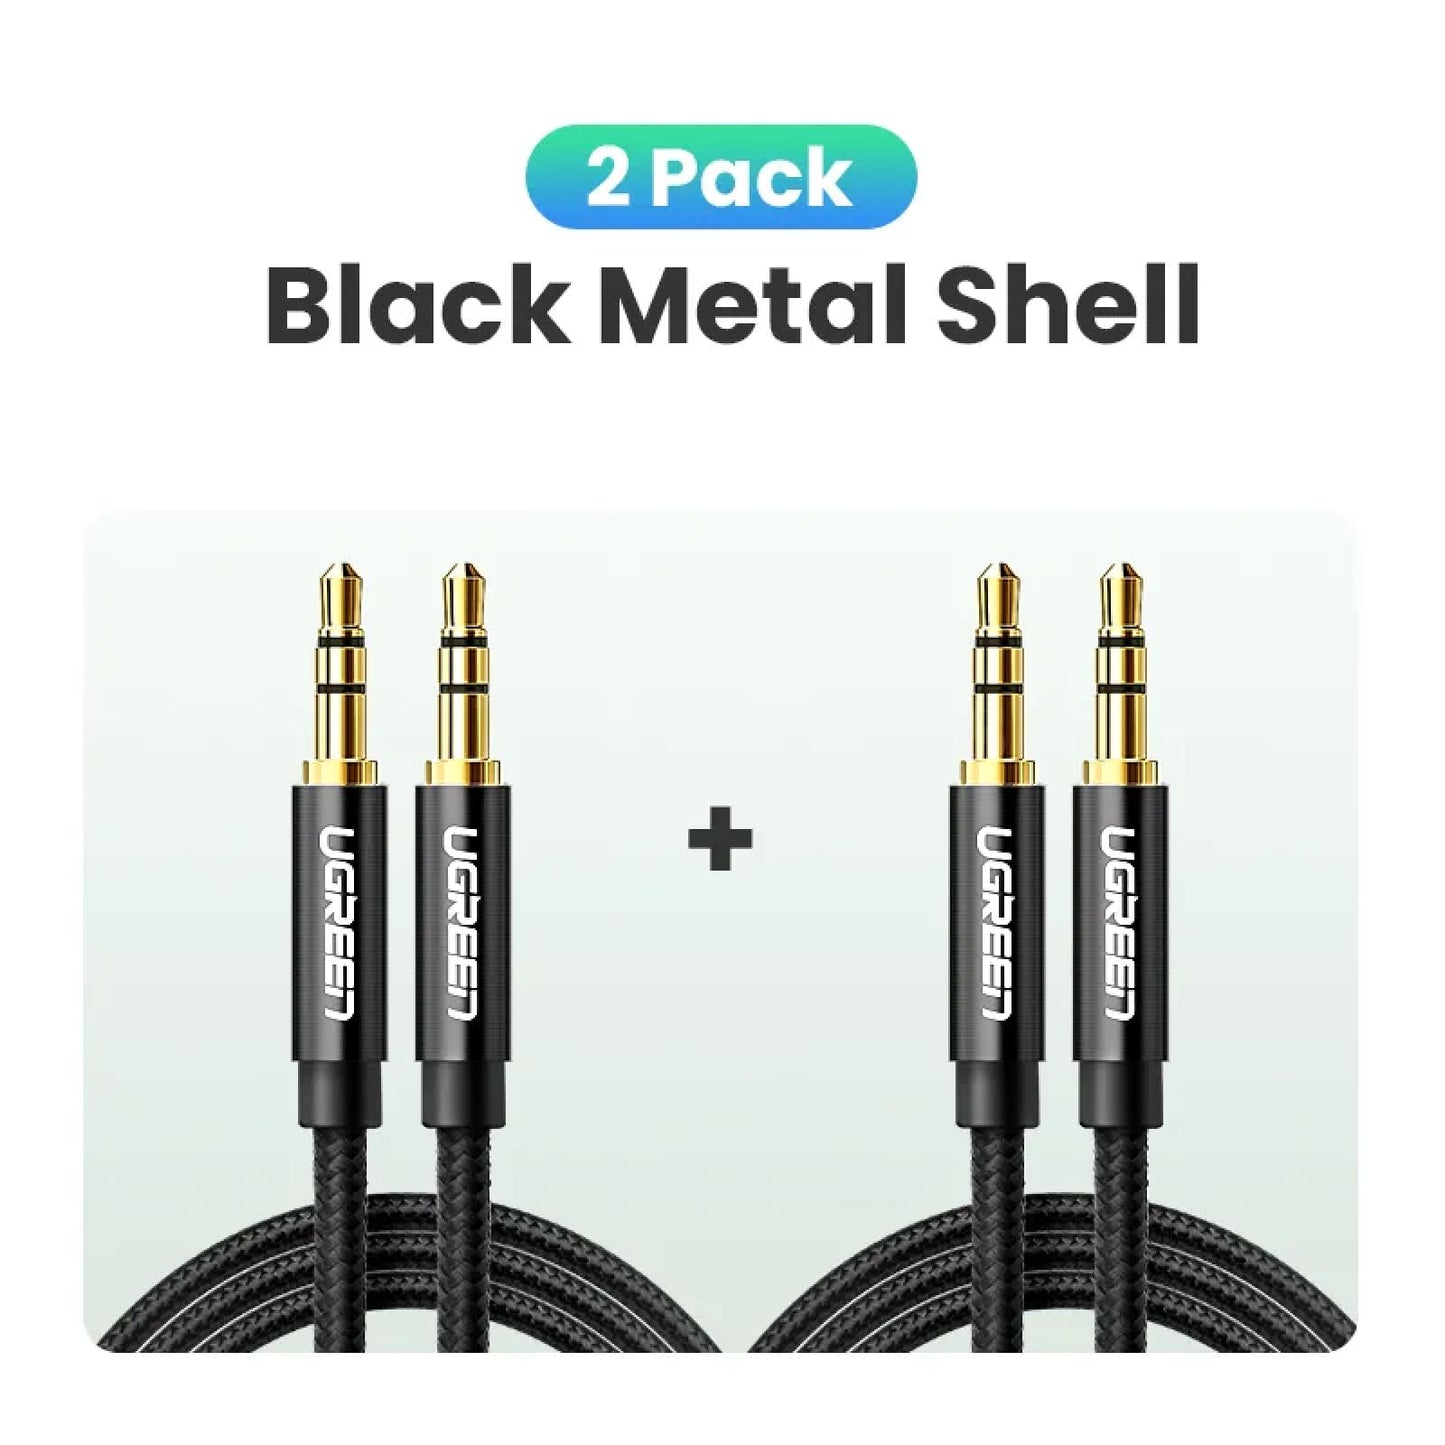 Ugreen 3.5Mm Male To Aux Cable - Audio For Iphone Computer Headphones And More Black Metal---2 Pack